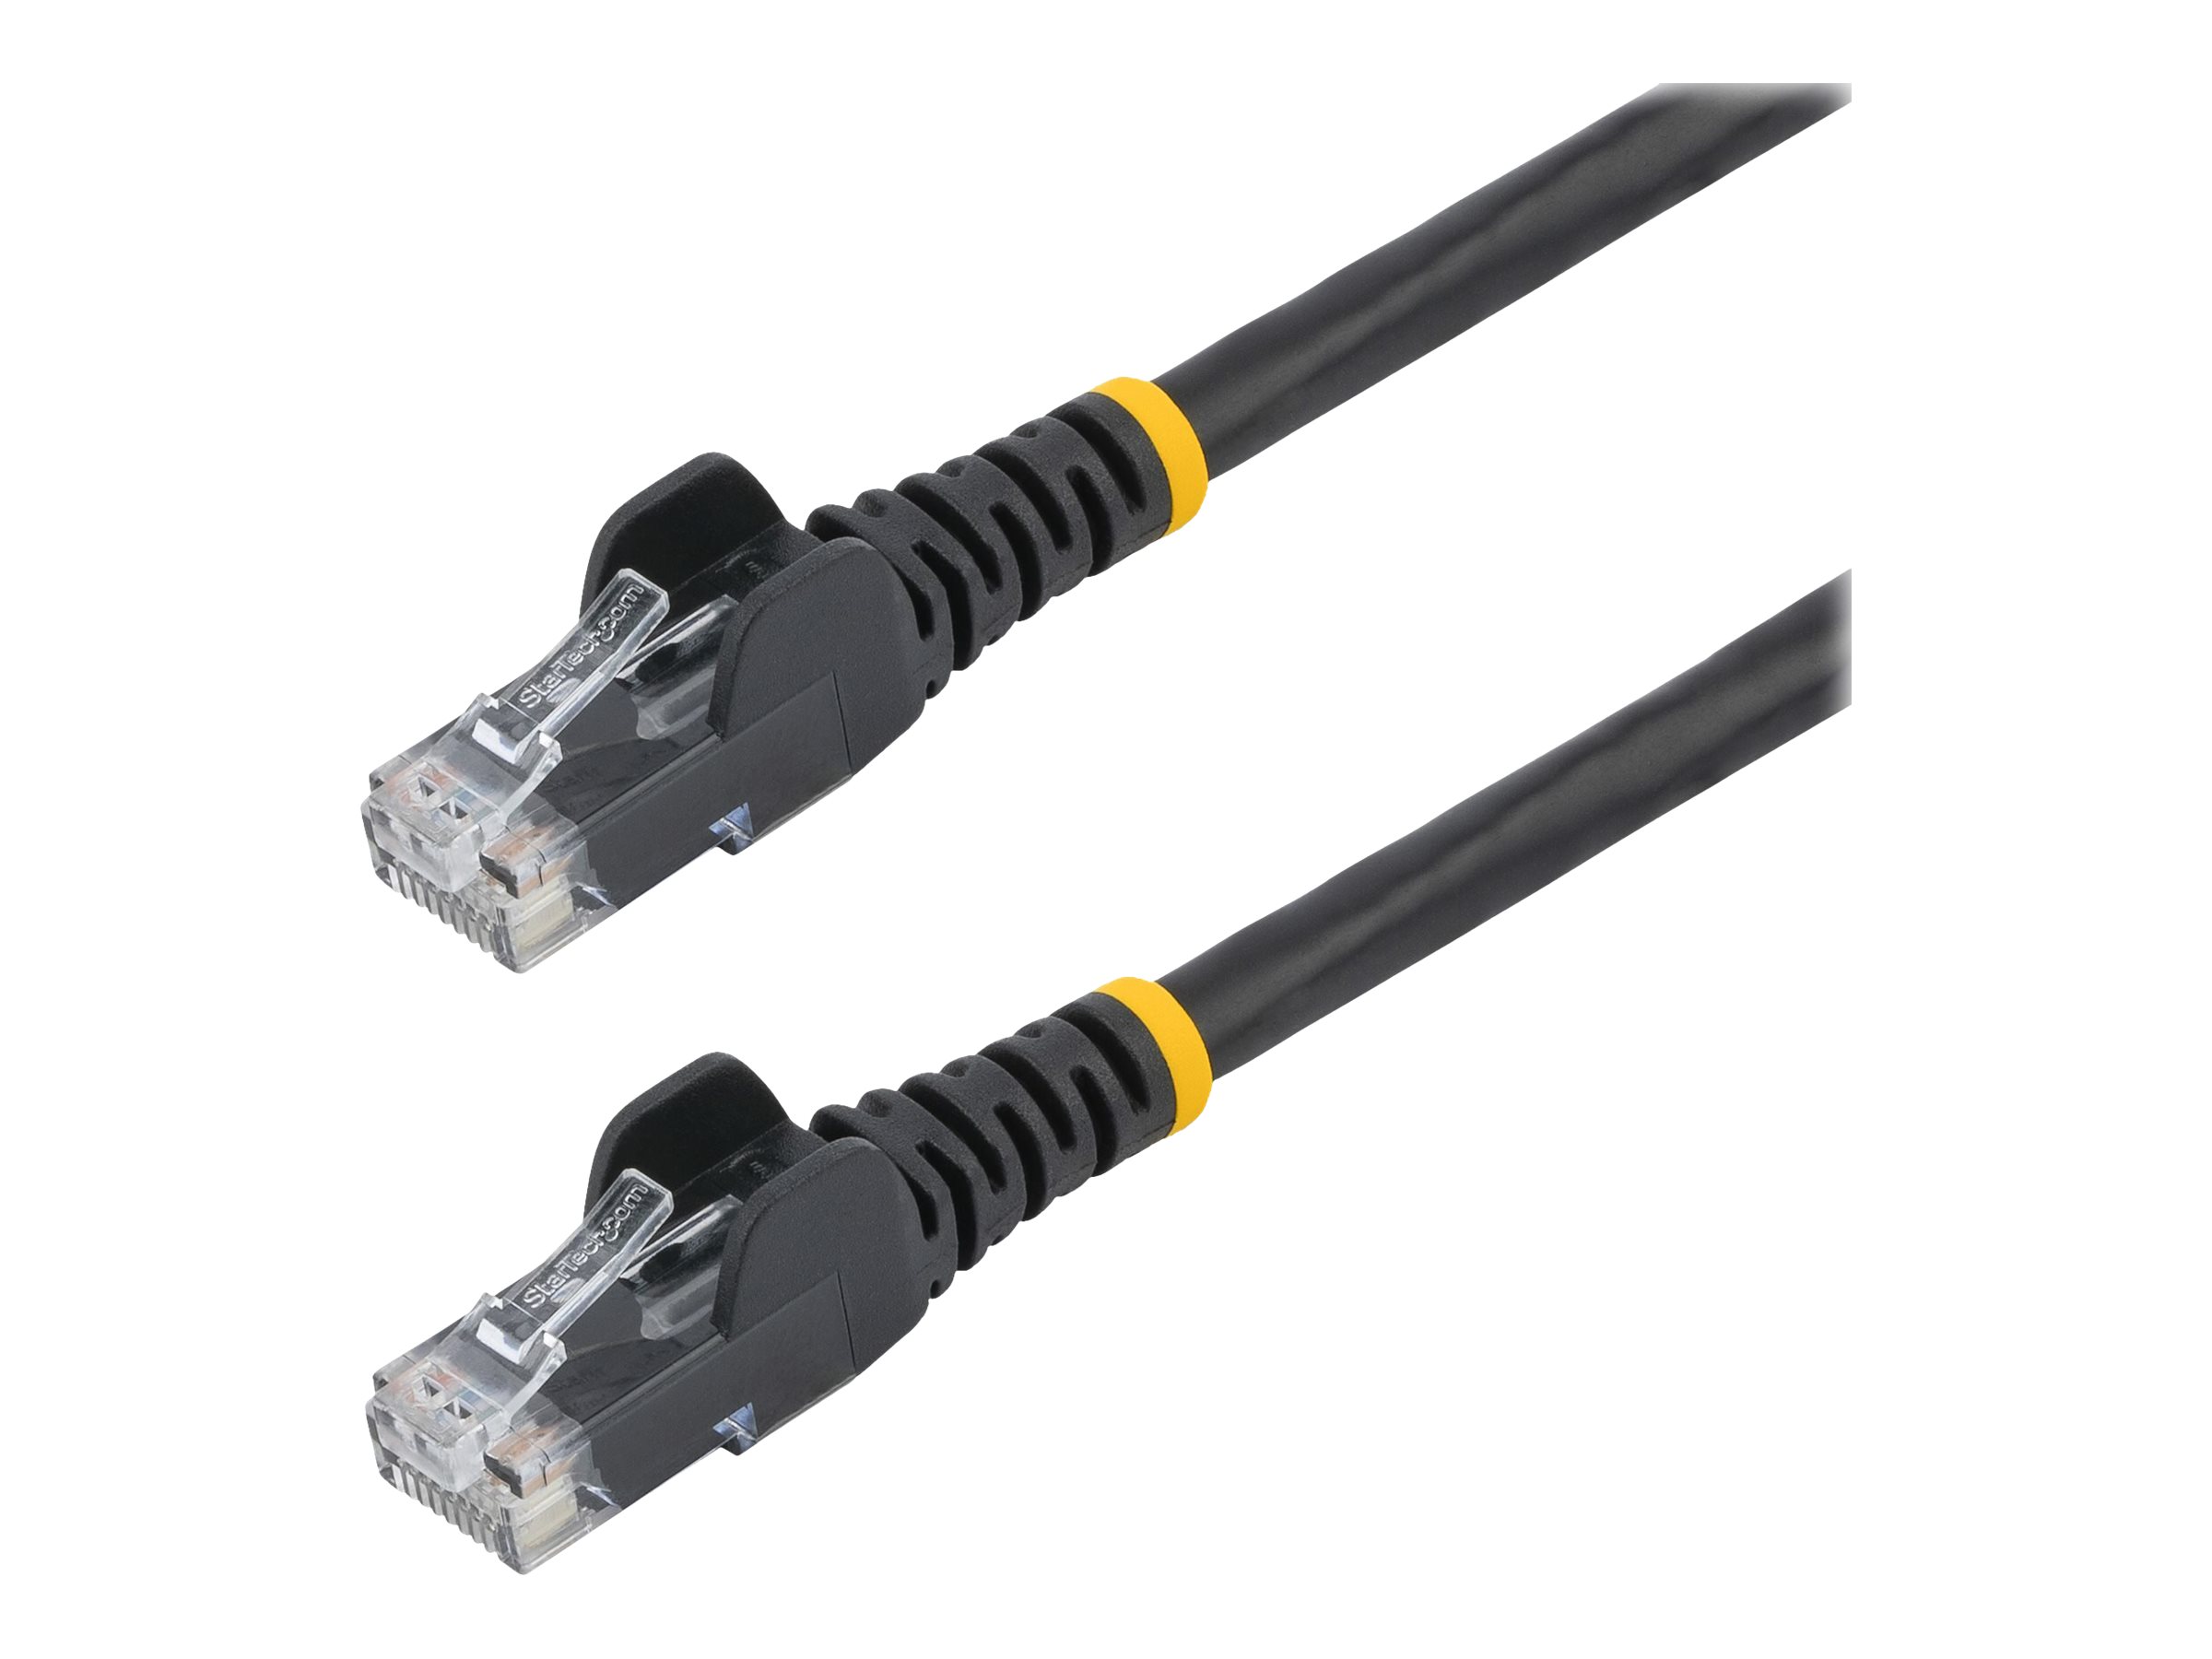 StarTech.com 25ft CAT6 Ethernet Cable, 10 Gigabit Snagless RJ45 650MHz 100W PoE Patch Cord, CAT 6 10GbE UTP Network Cable w/Strain Relief, Black, Fluke Tested/Wiring is UL Certified/TIA